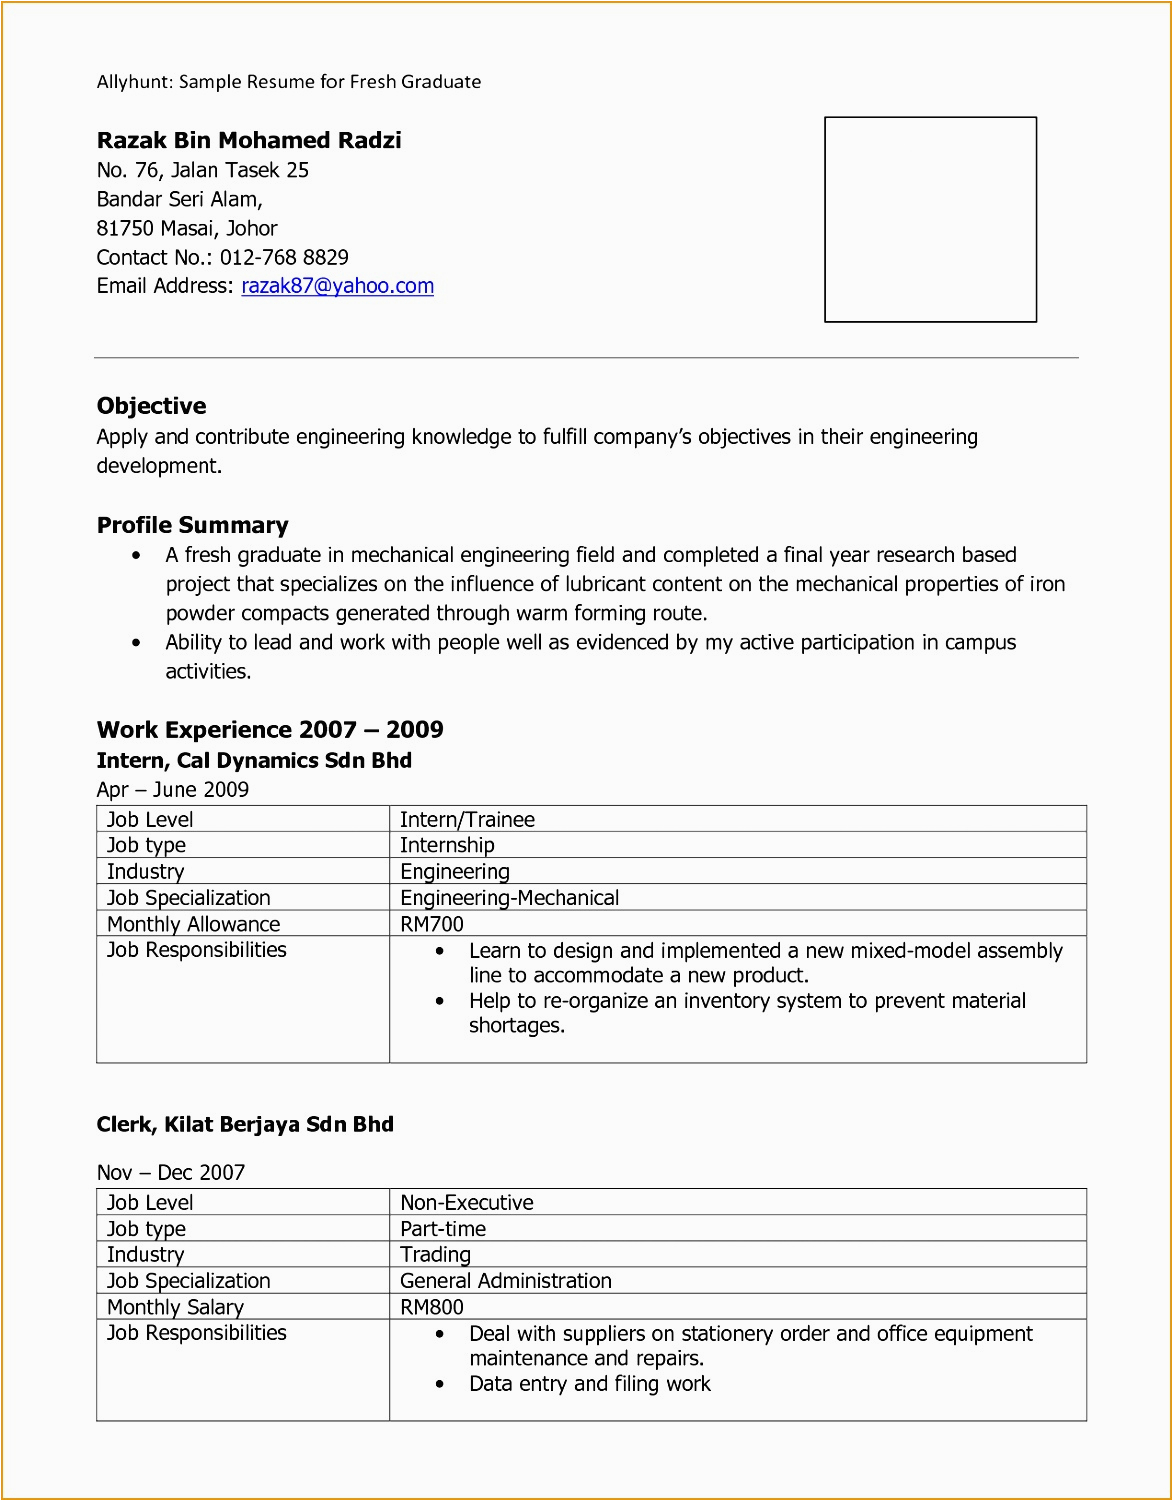 example of resume for fresh graduate f